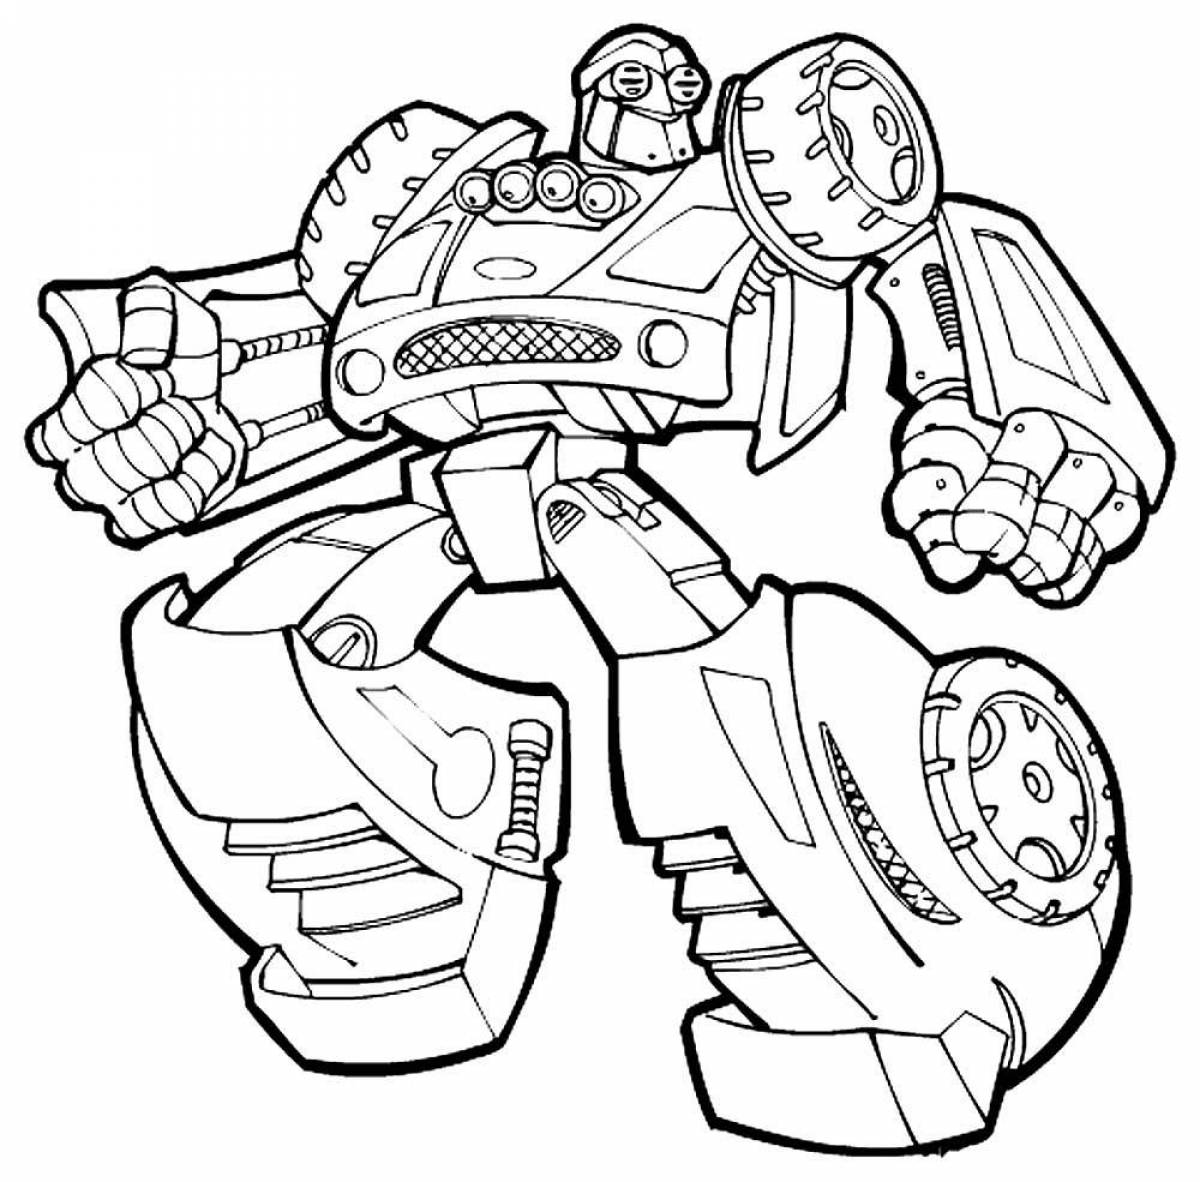 Playful robot coloring page for boys